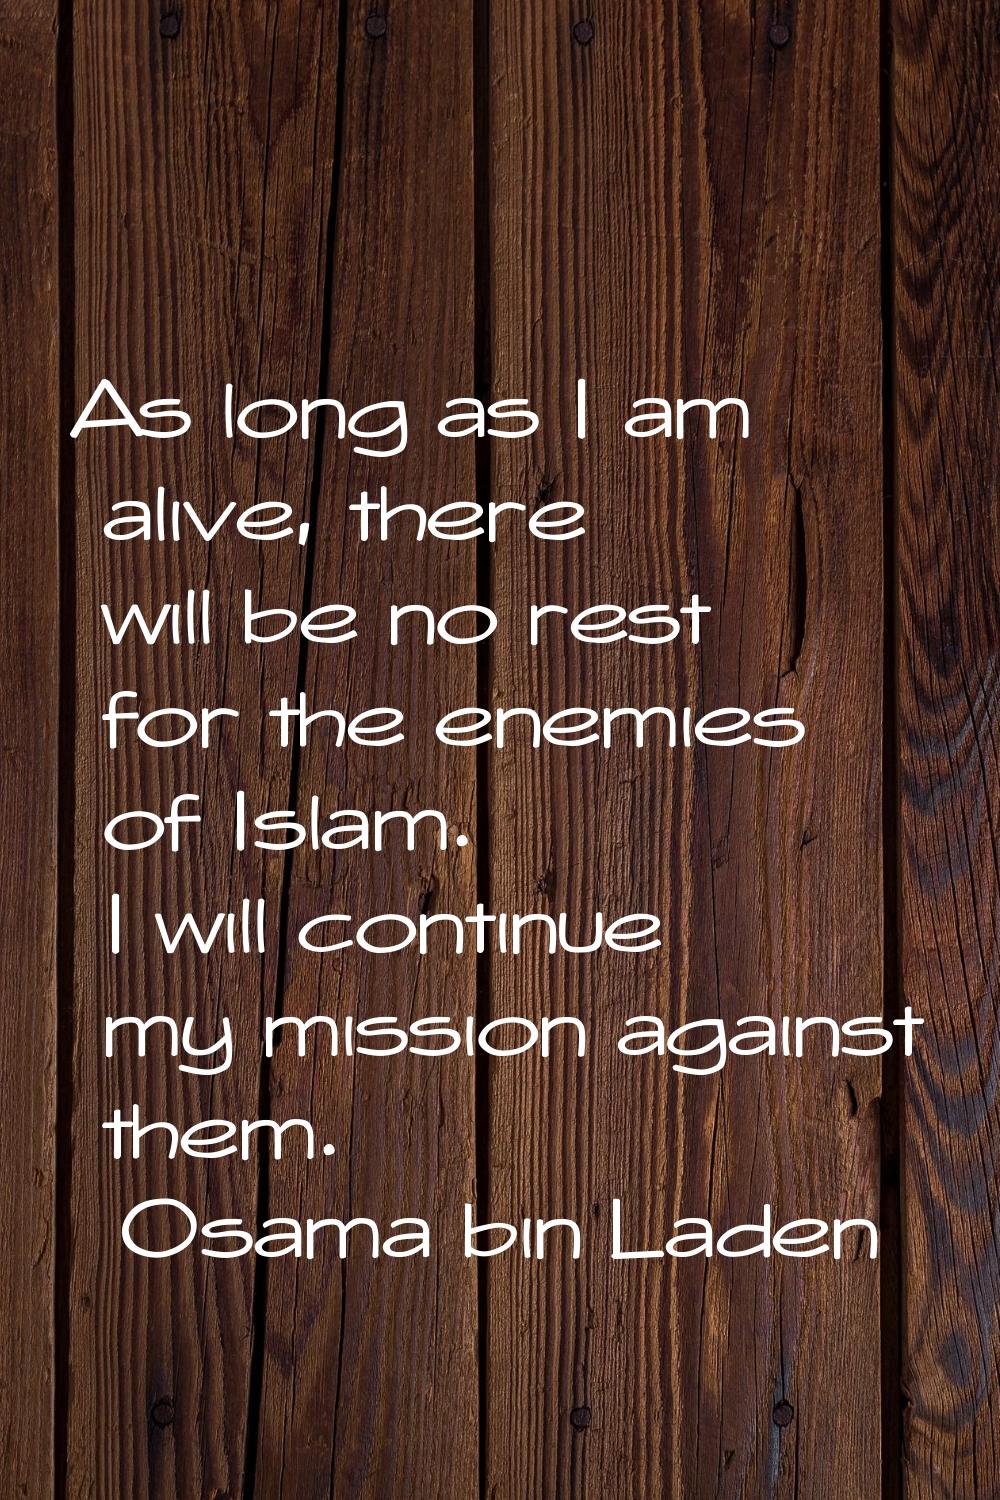 As long as I am alive, there will be no rest for the enemies of Islam. I will continue my mission a